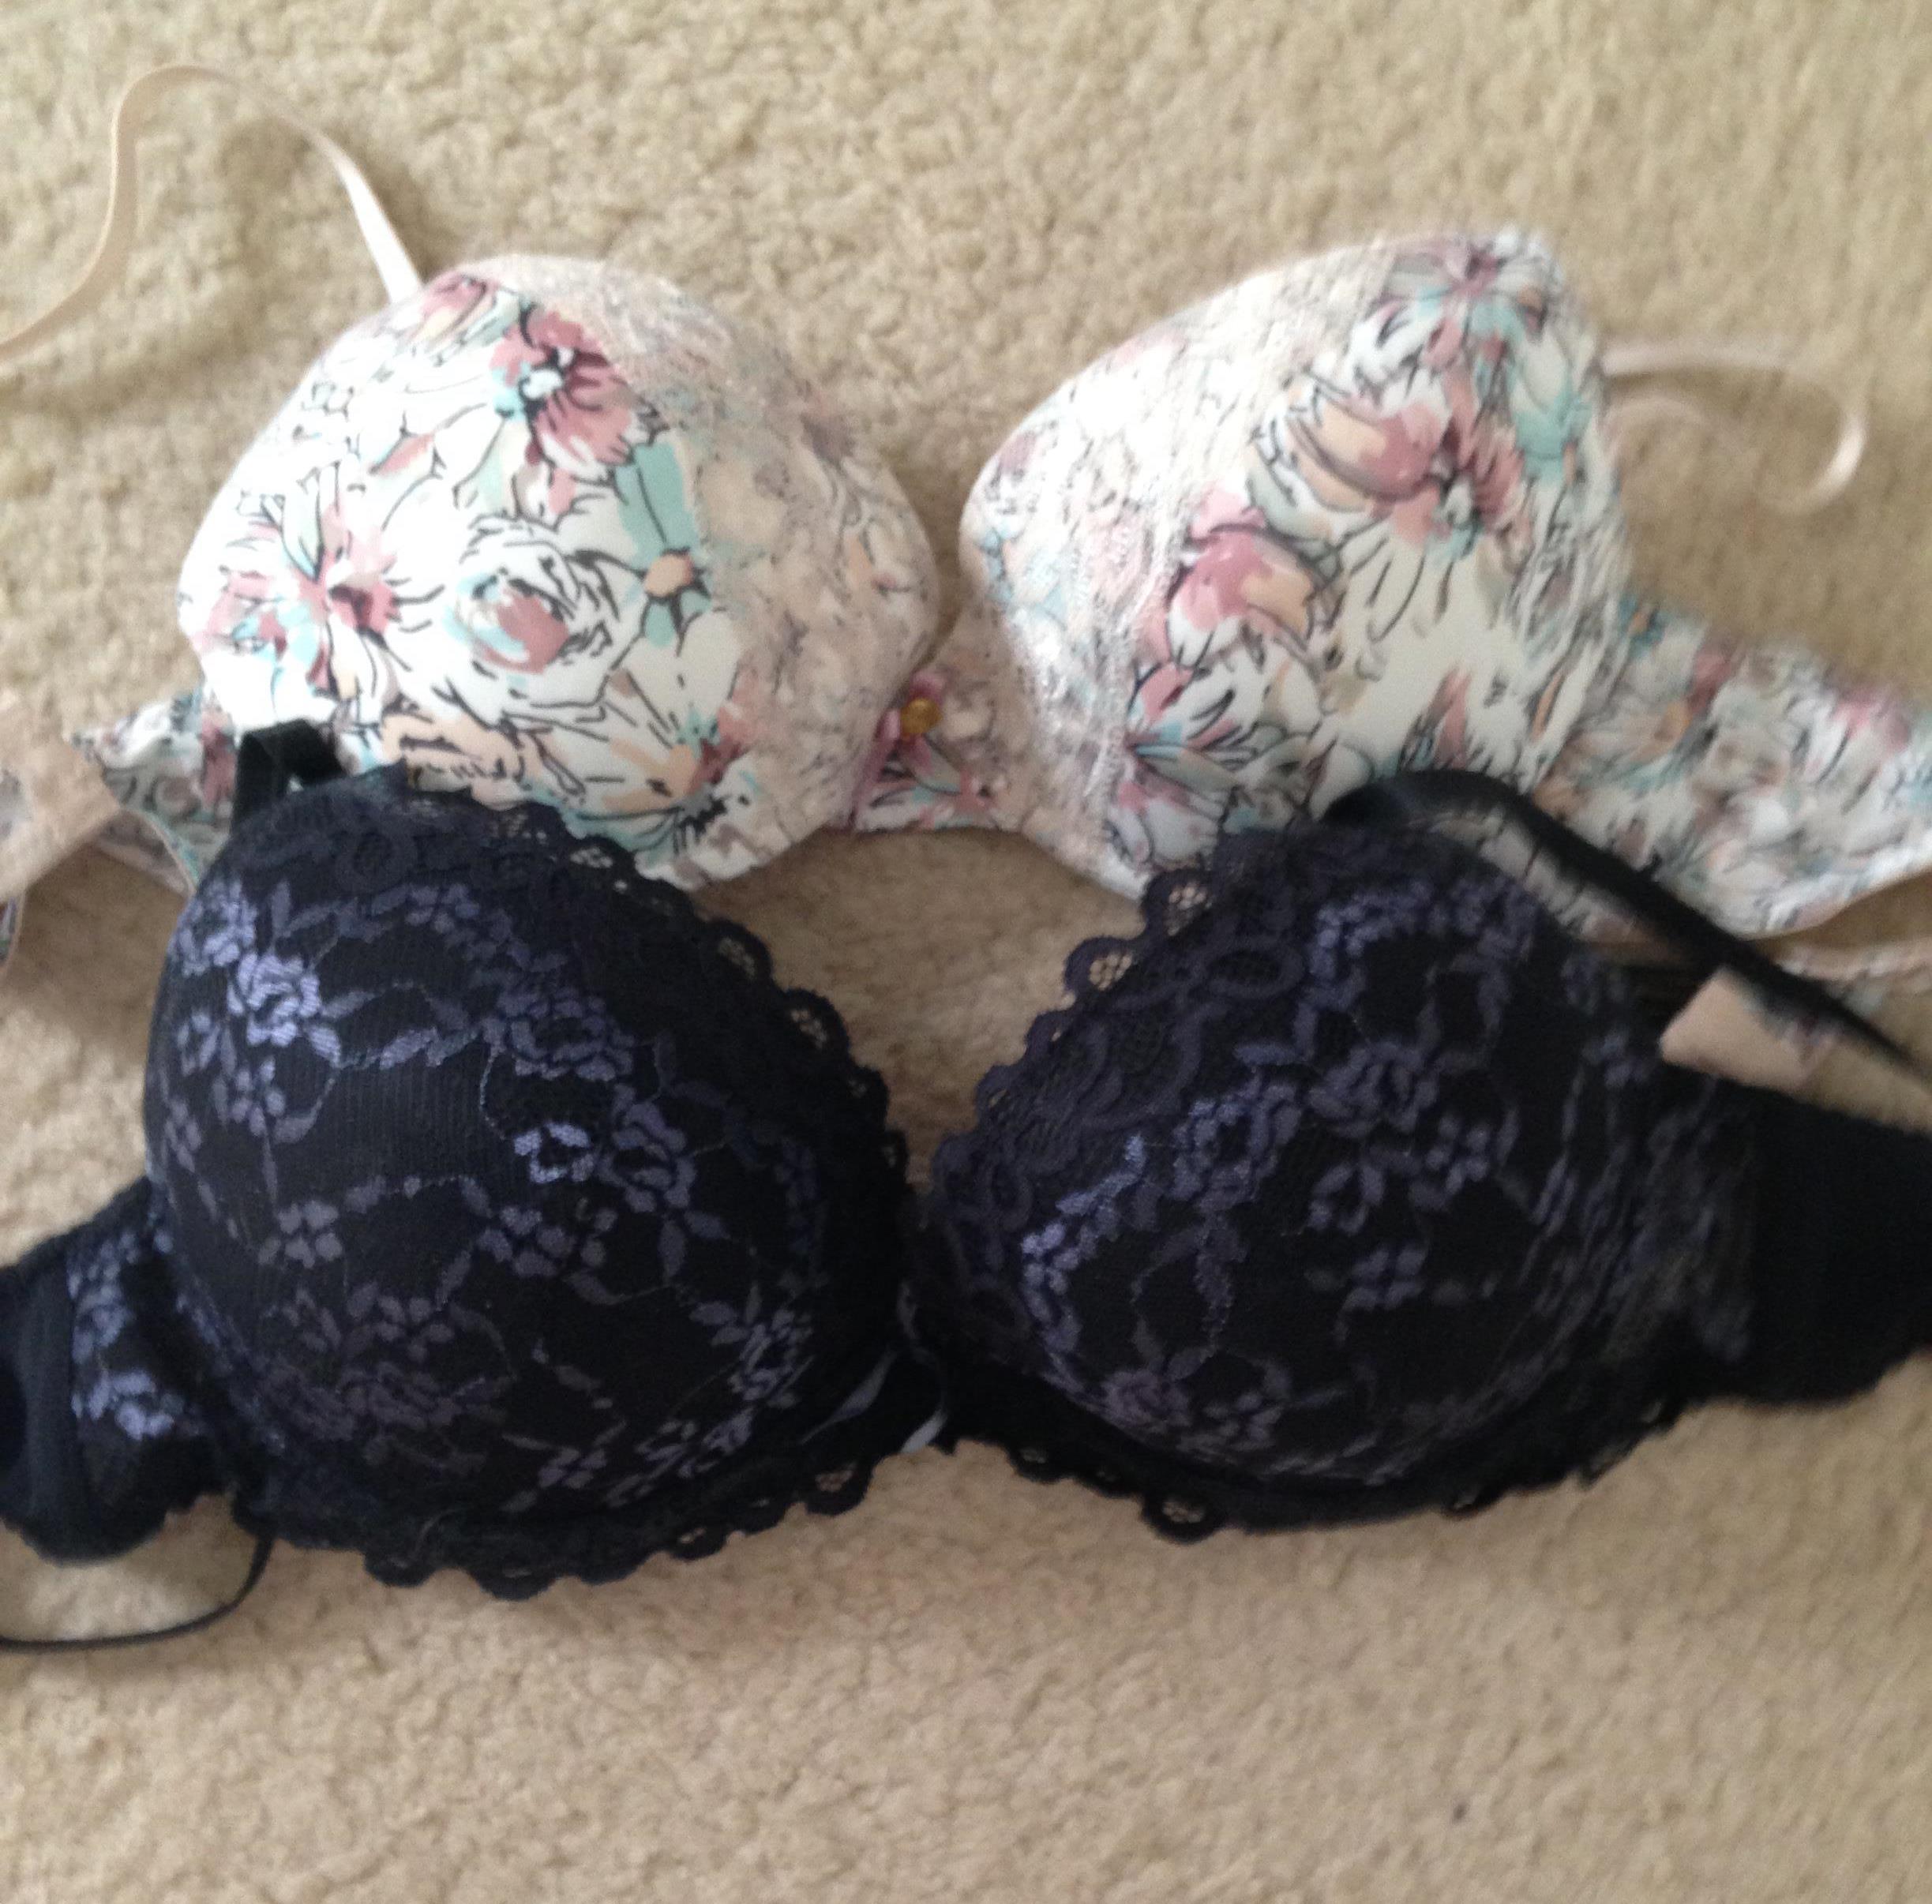 Marilyn Monroe Bras from TJ Maxx. At 5.99 each my new favorite